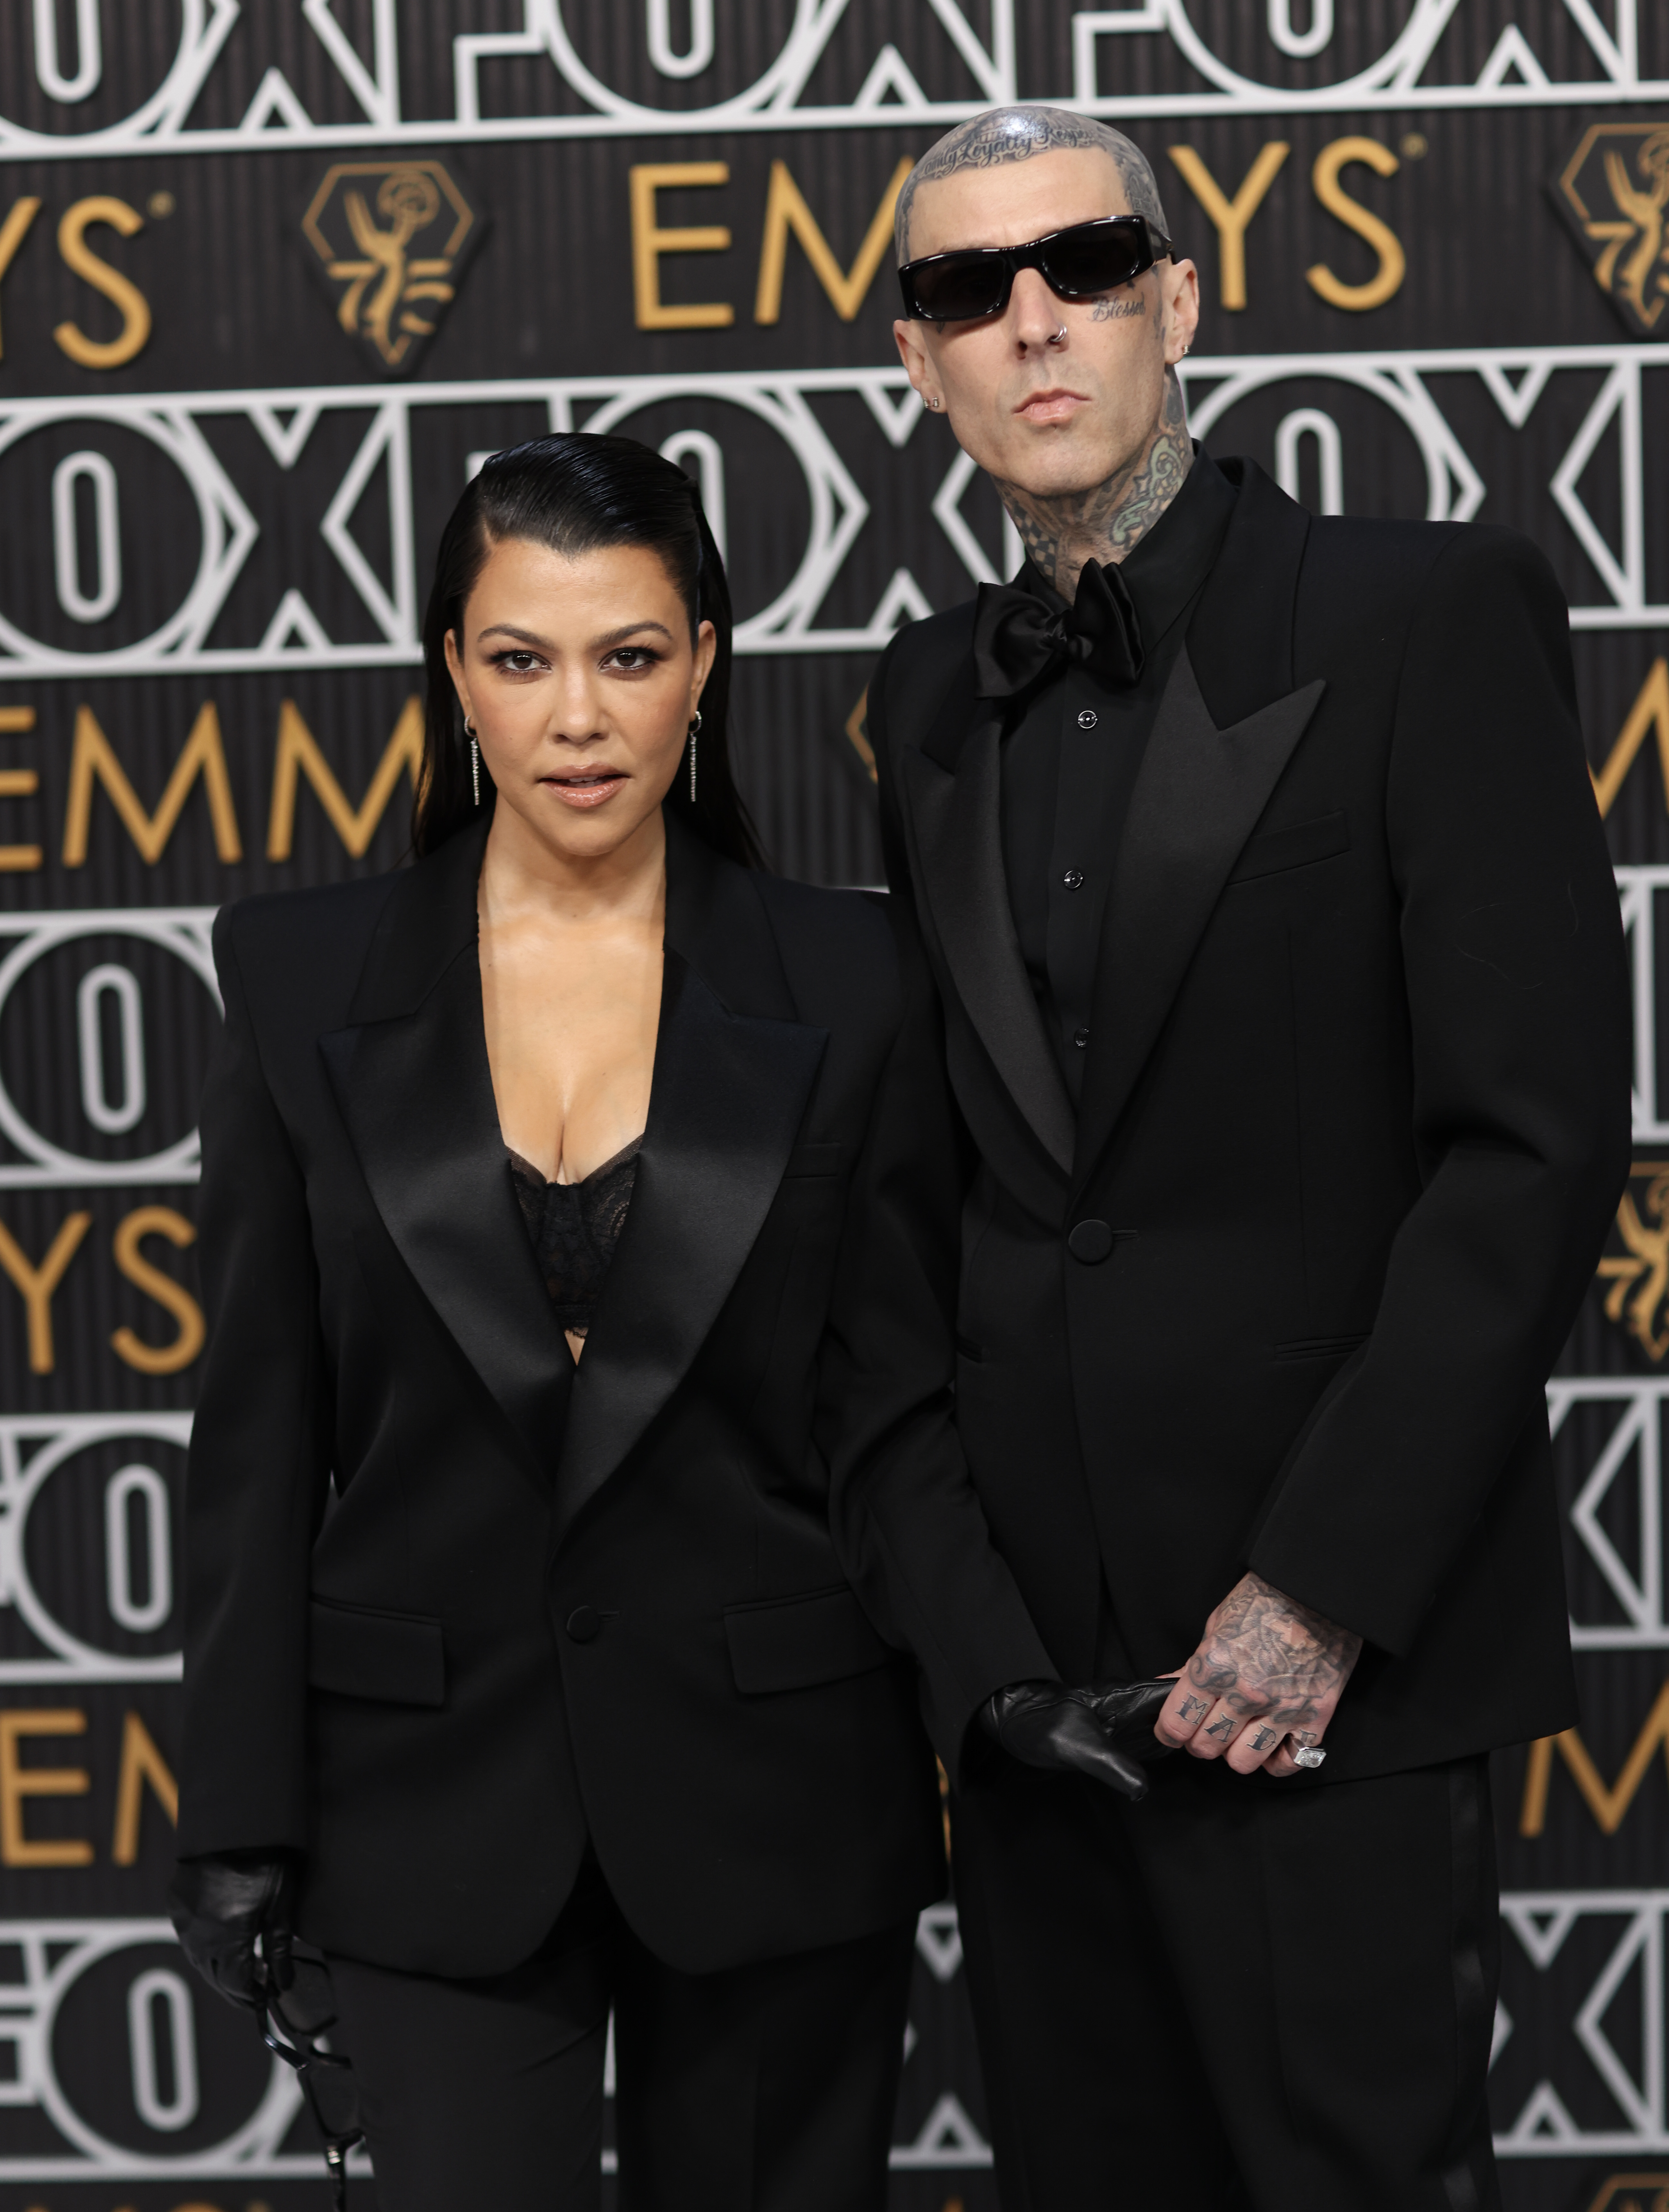 Kourtney has supposedly changed her wardrobe since she married Travis Barker